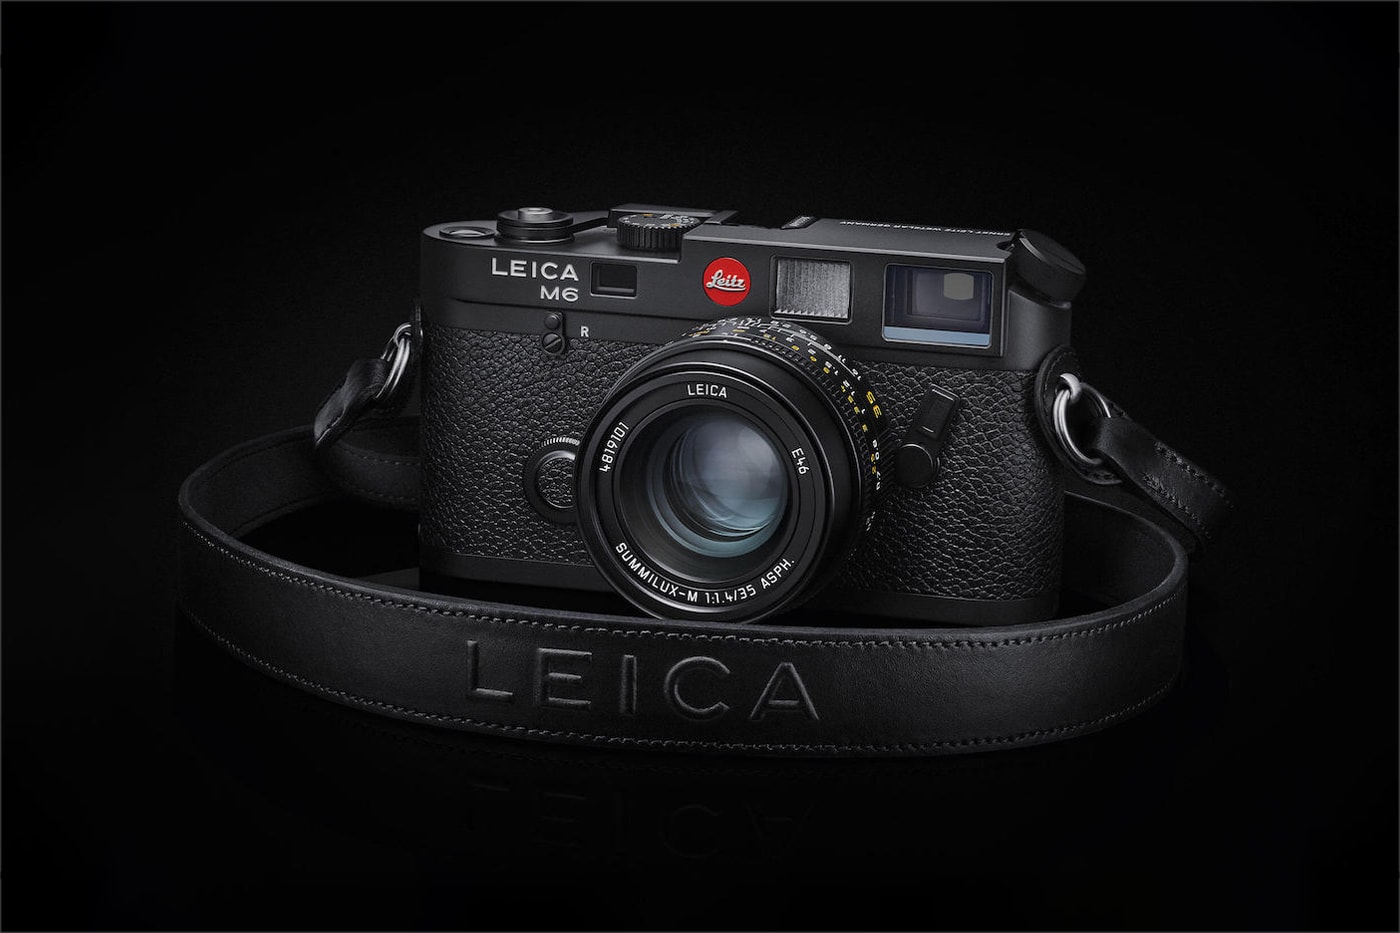 Breaking: Leica will bring back to life the M6 film camera